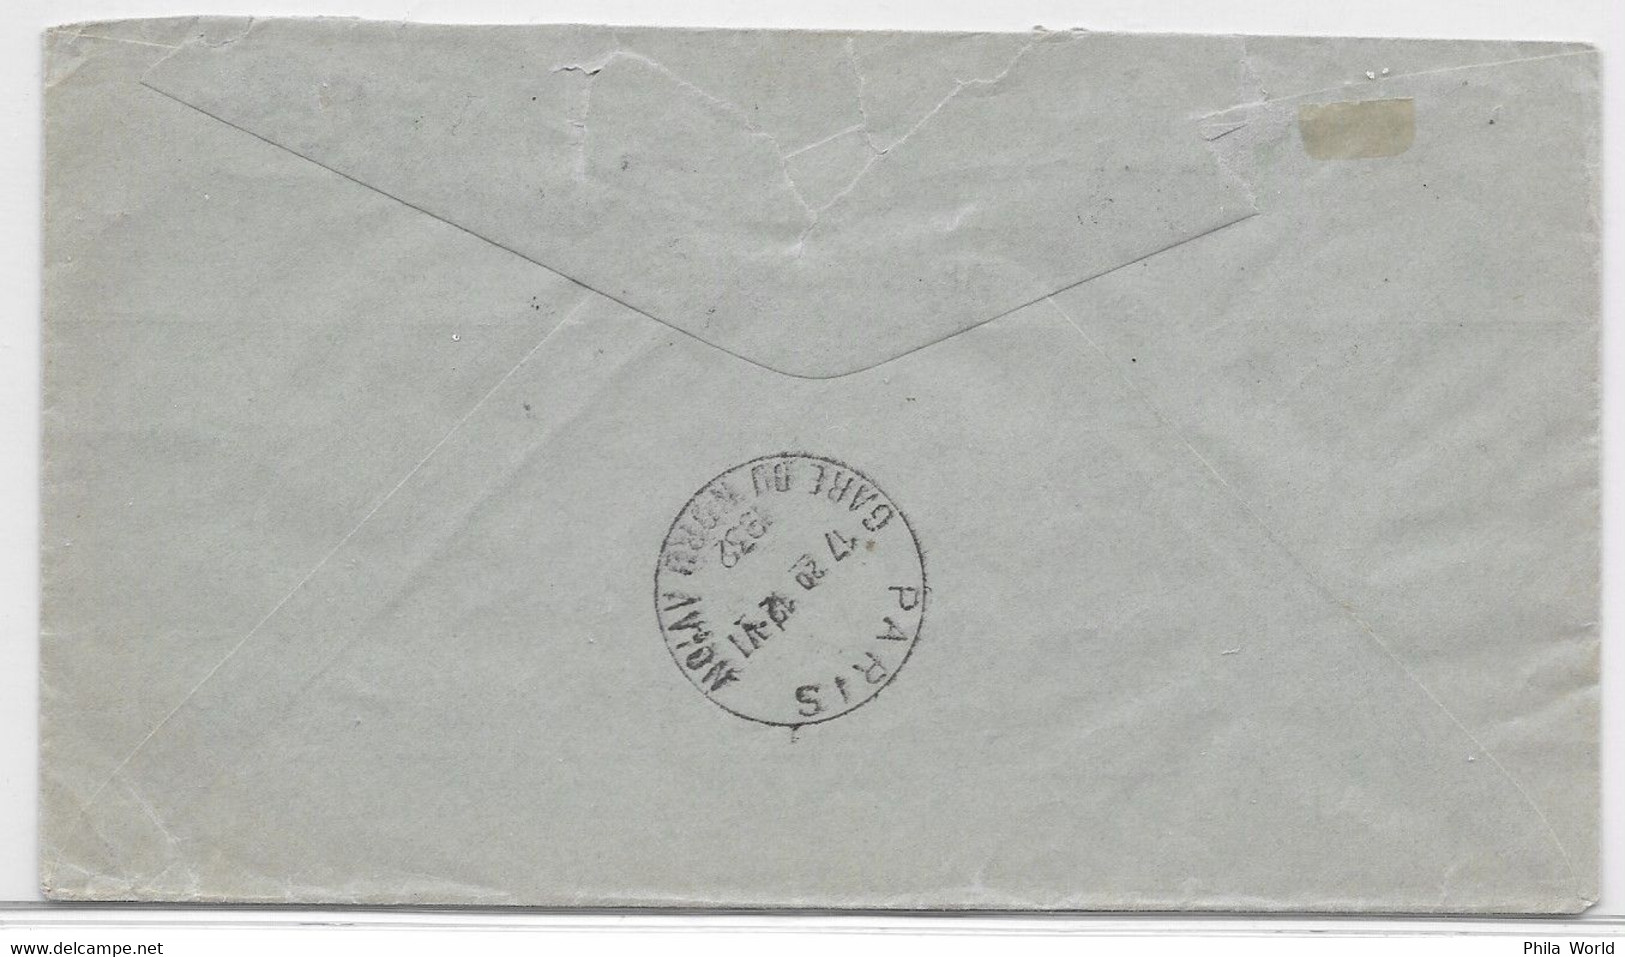 SERVICIO AEREO LINEAS CAT - 1932 MEXICO Air Mail Cover To Frankfurt GERMANY Via PARIS + LABEL And MIT LUFTPOST BEFORDET - Avions